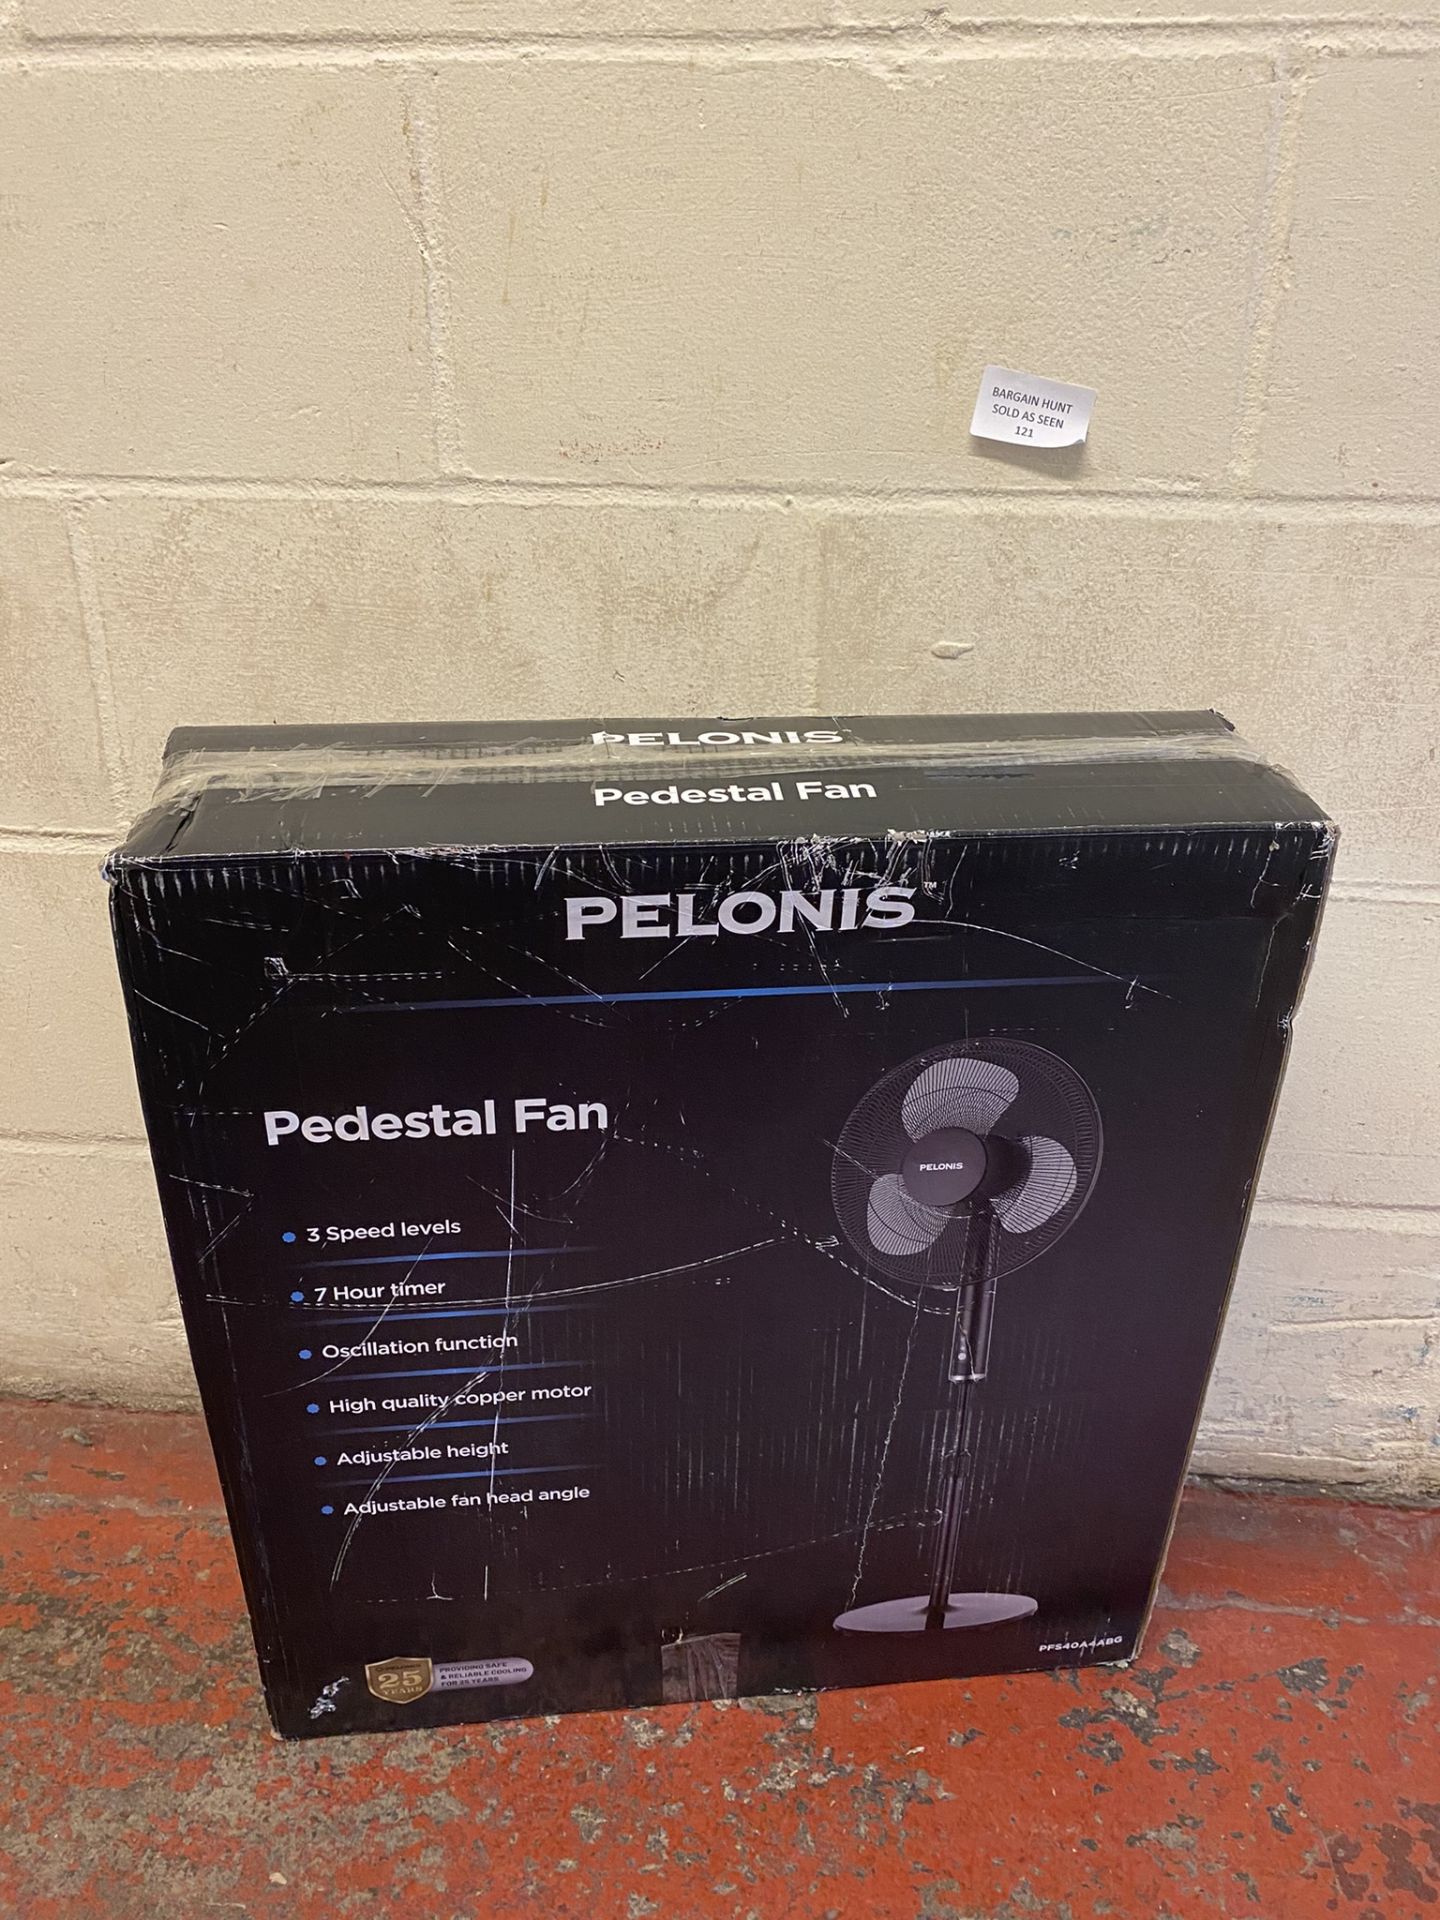 Pelonis 16-Inch Pedestal Oscillating Fan with Remote Control RRP £58.99 - Image 2 of 2